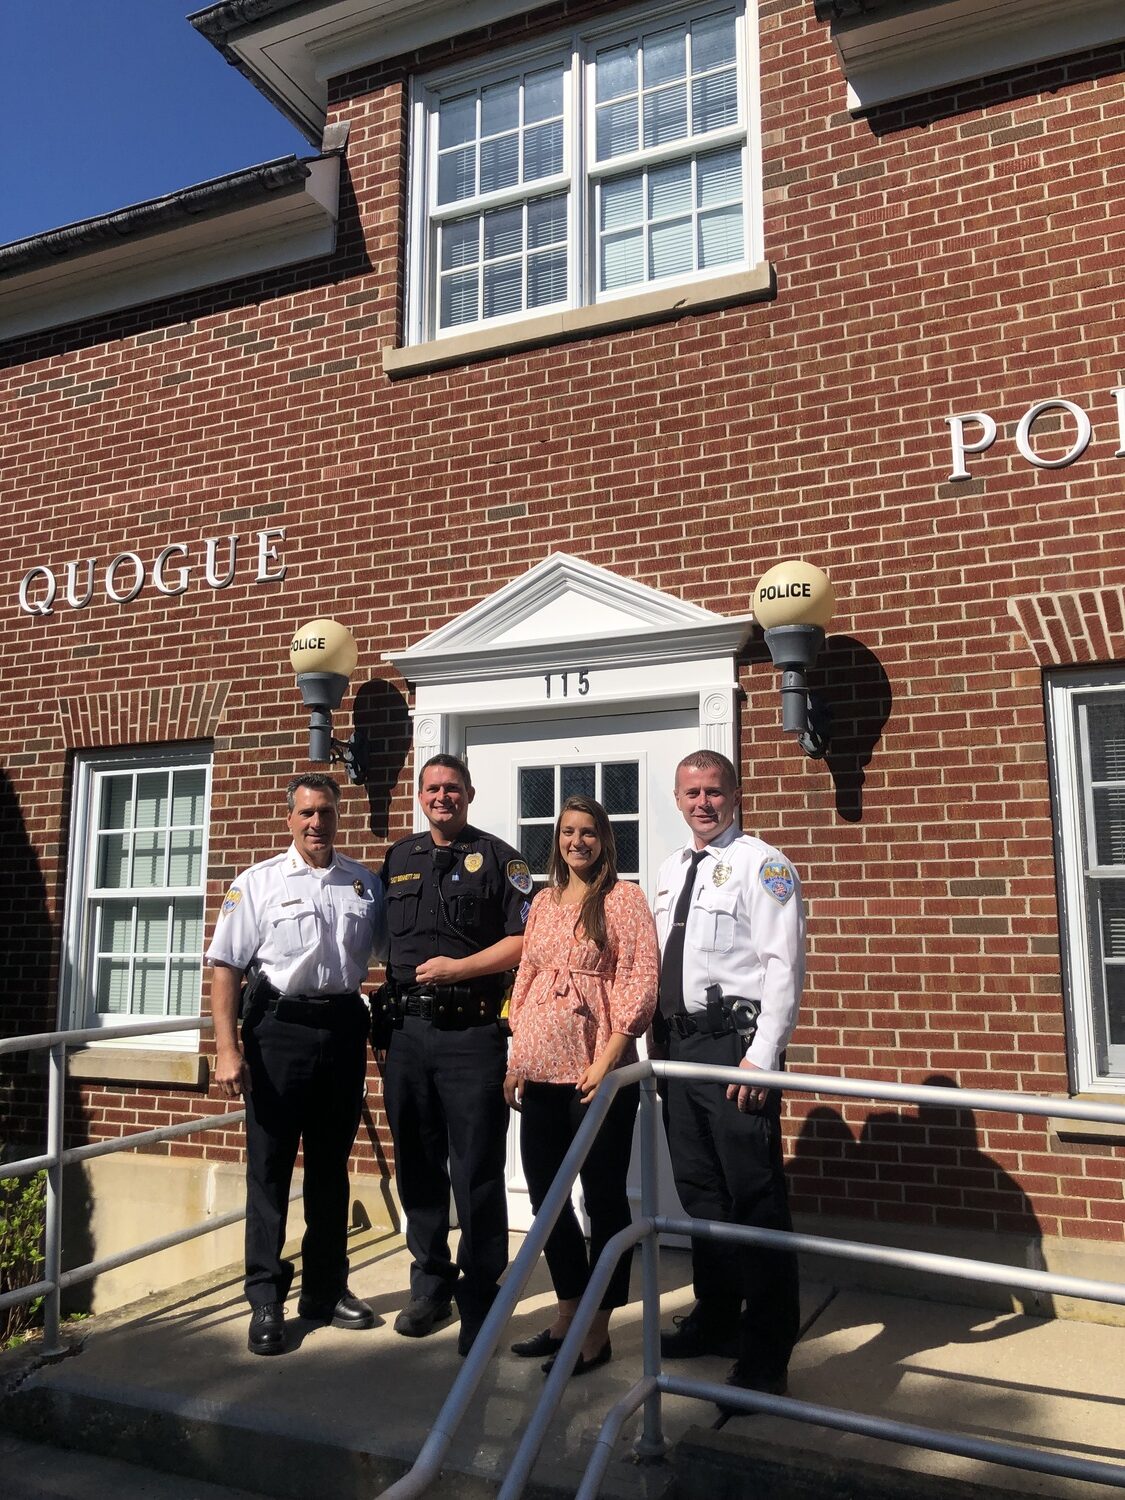 From left, Quogue Police Chief Chris Isola, Sergeant Daniel Bennett, officer Ashleigh Trotta and Lieutenant Daniel Hartman worked together to make sure the Quogue Police Department met the necessary standards to officially become an accredited police department in the state of New York. CAILIN RILEY